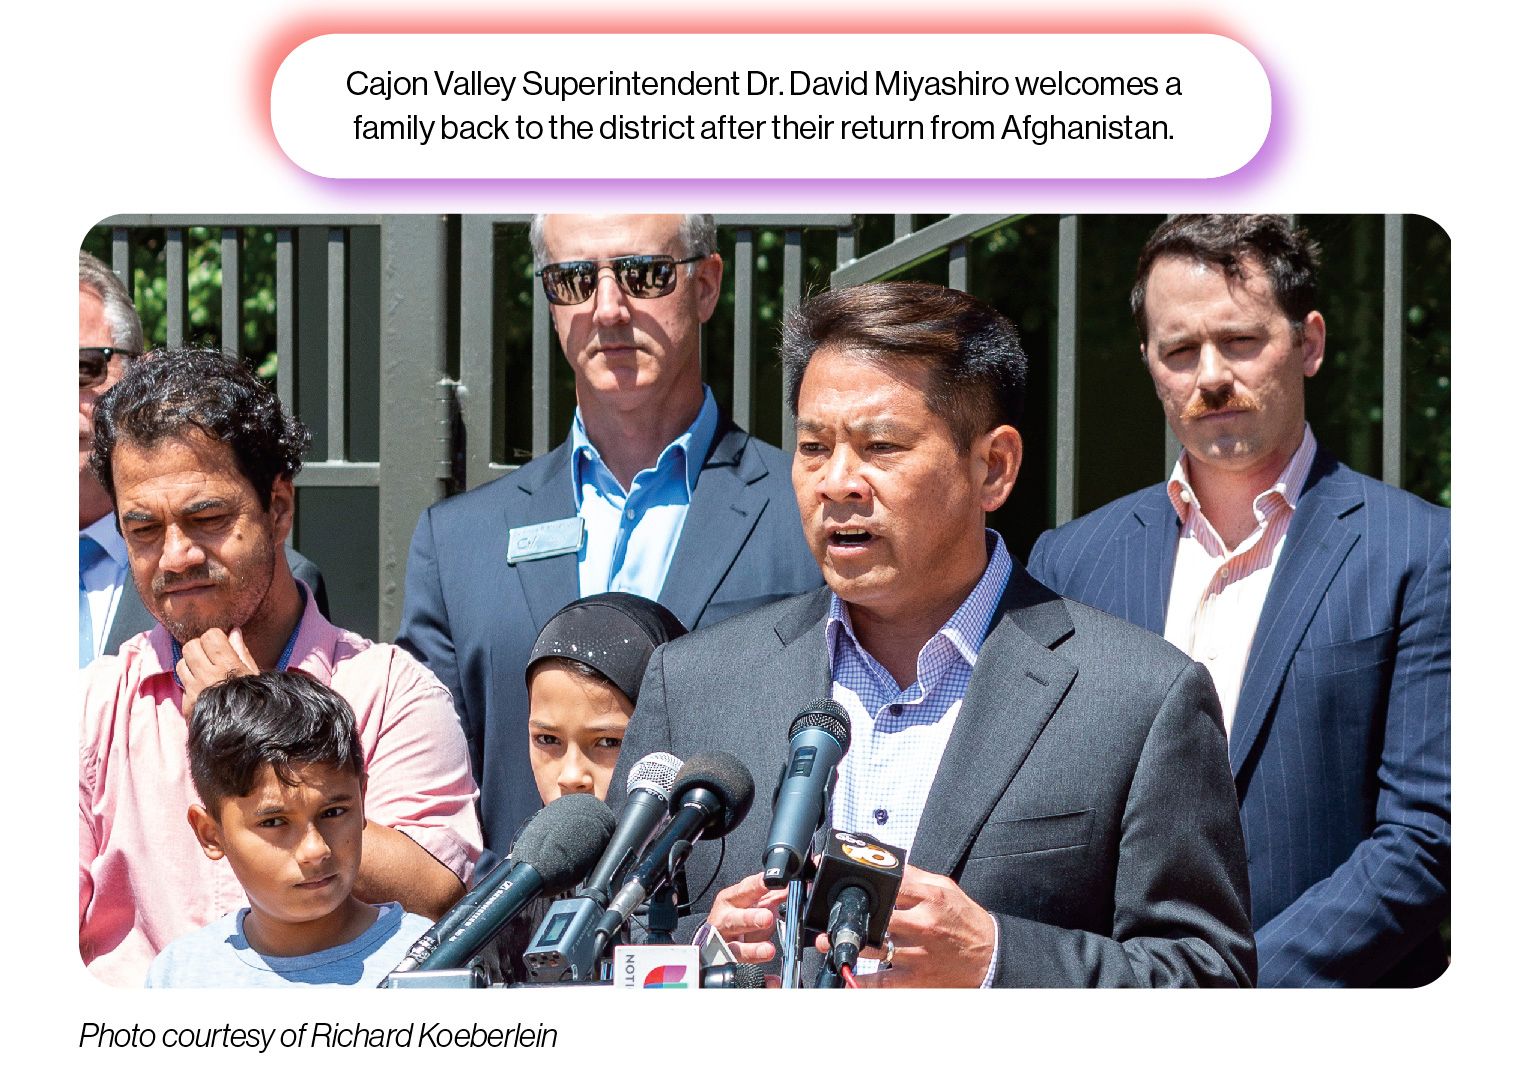 Image: A photo from a Cajon Valley Union School District press conference, with the SchoolCEO caption 'Cajon Valley Superintendent Dr. David Miyashiro welcomes a family back to the district after their return from Afghanistan.'